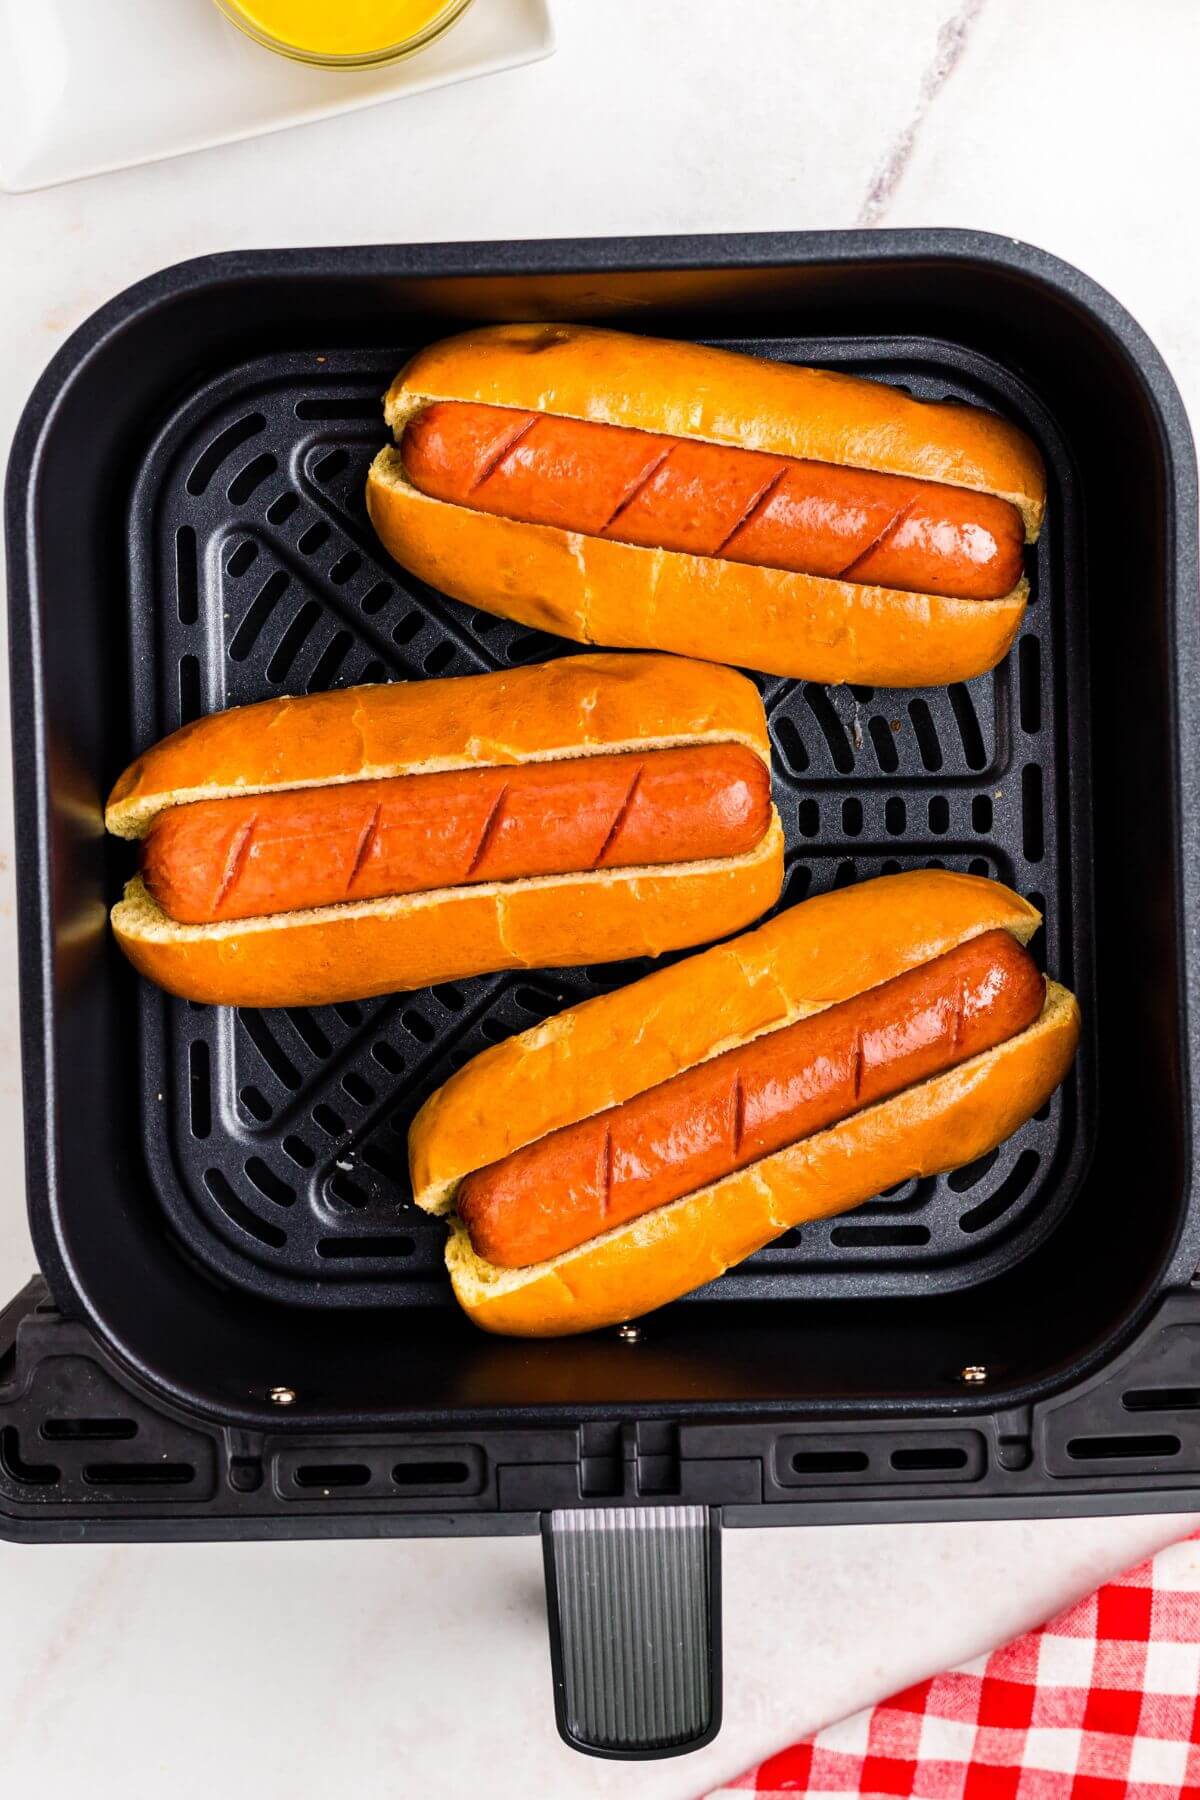 Golden juicy hot dogs in buns in the air fryer basket. 